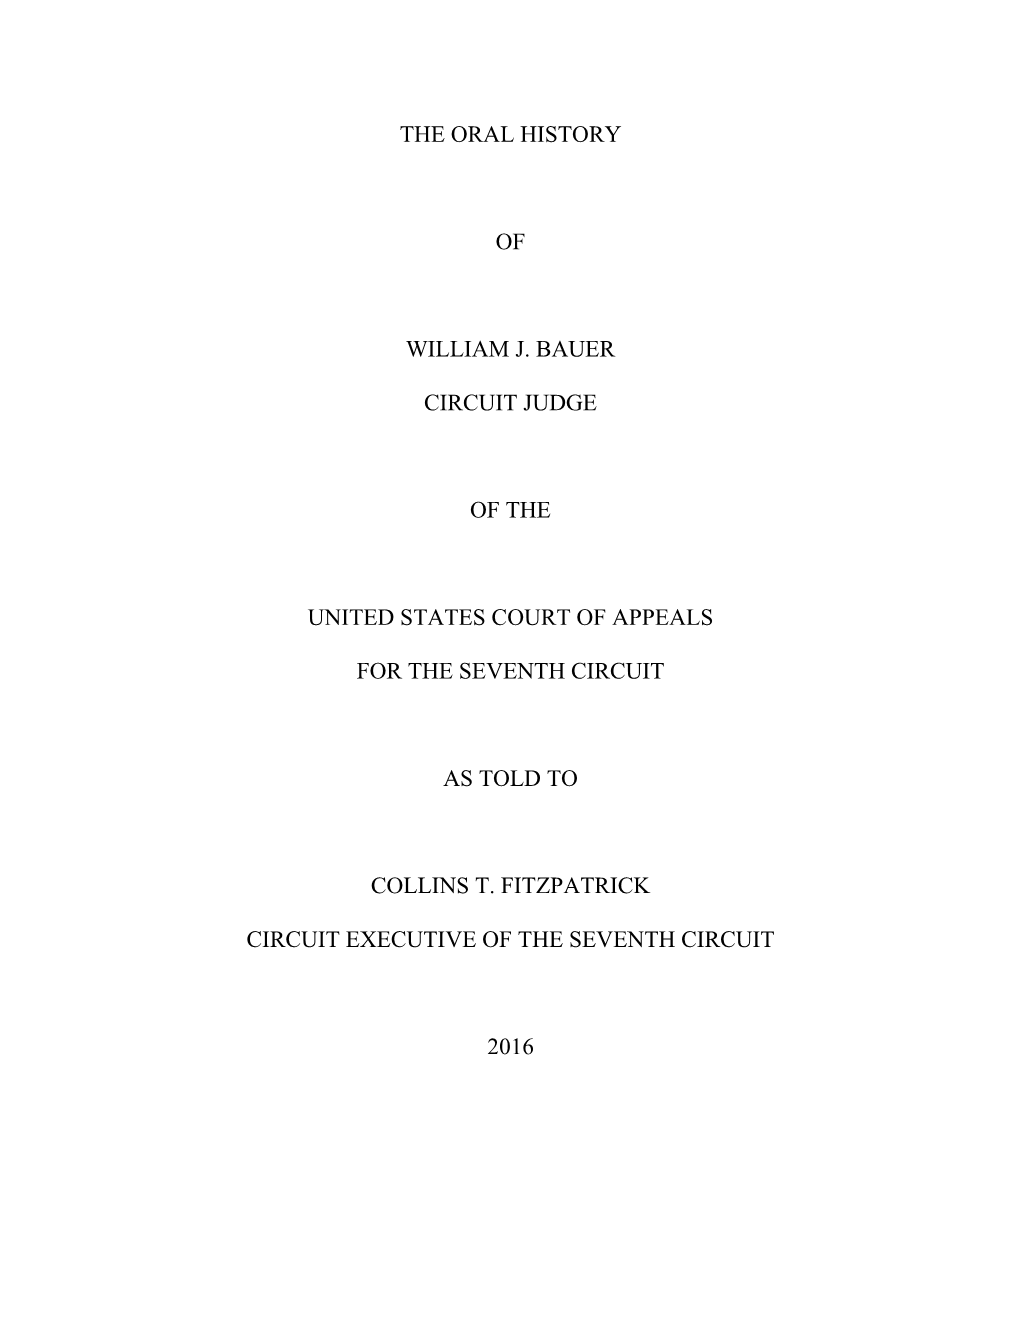 The Oral History of William J. Bauer Circuit Judge of The